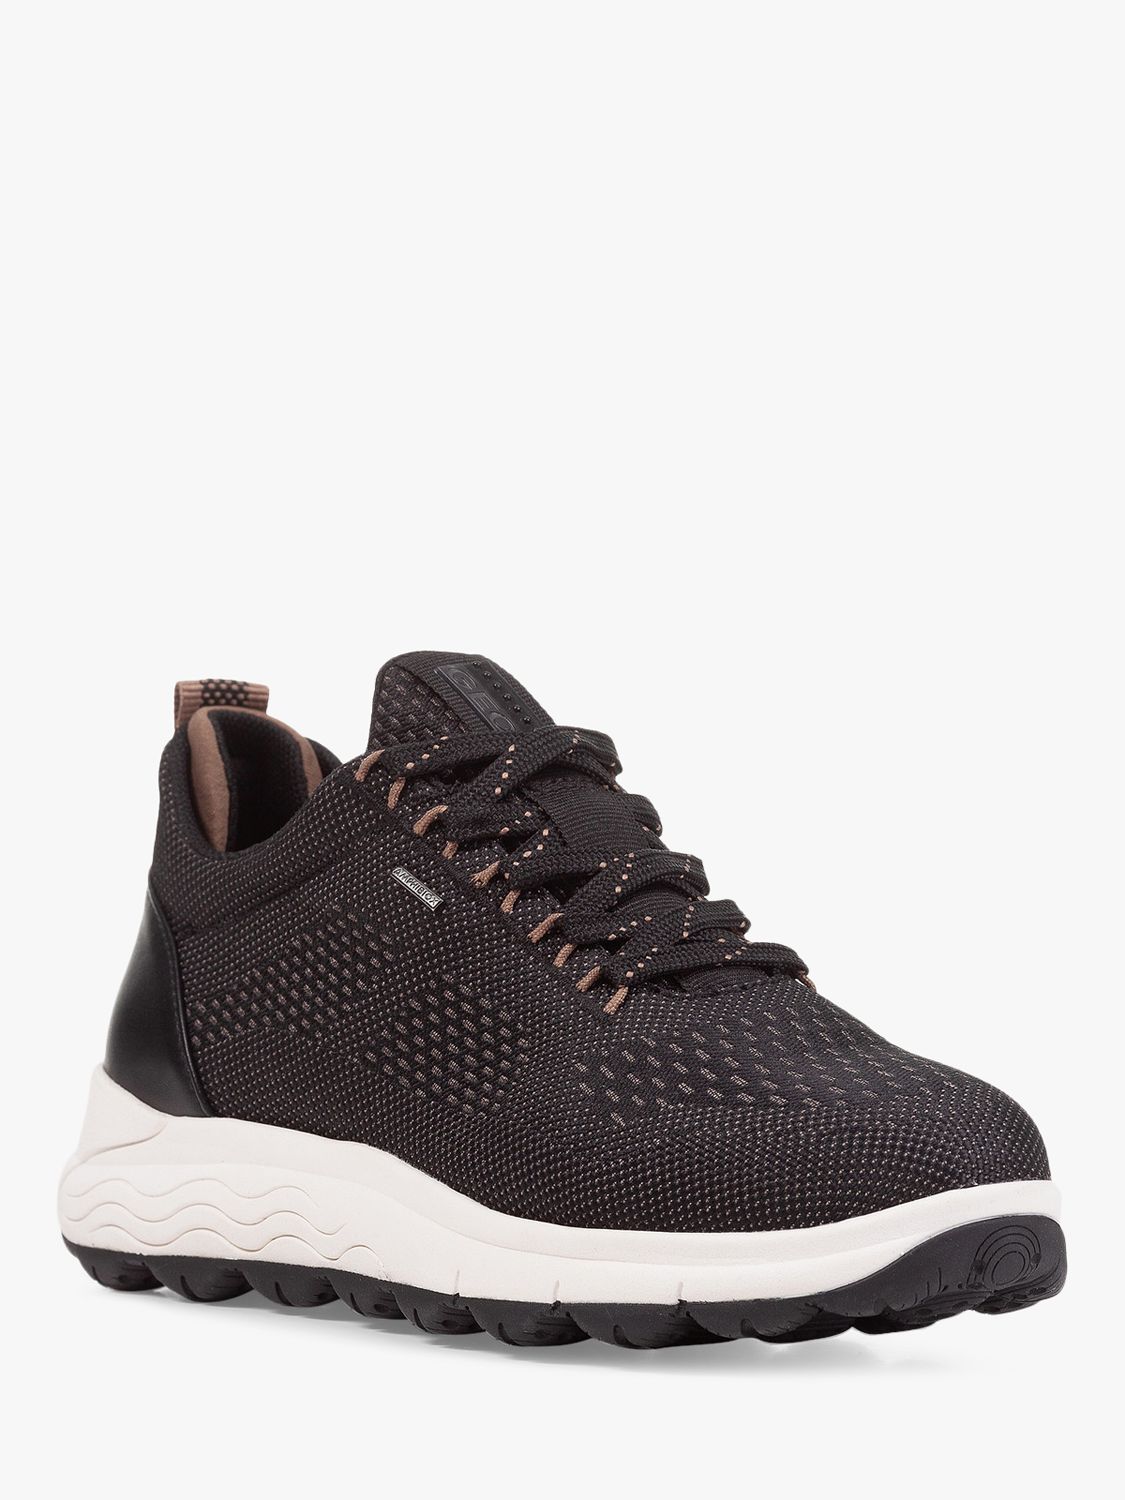 Buy Geox D Spherica 4x4 Lace Up Trainers Online at johnlewis.com